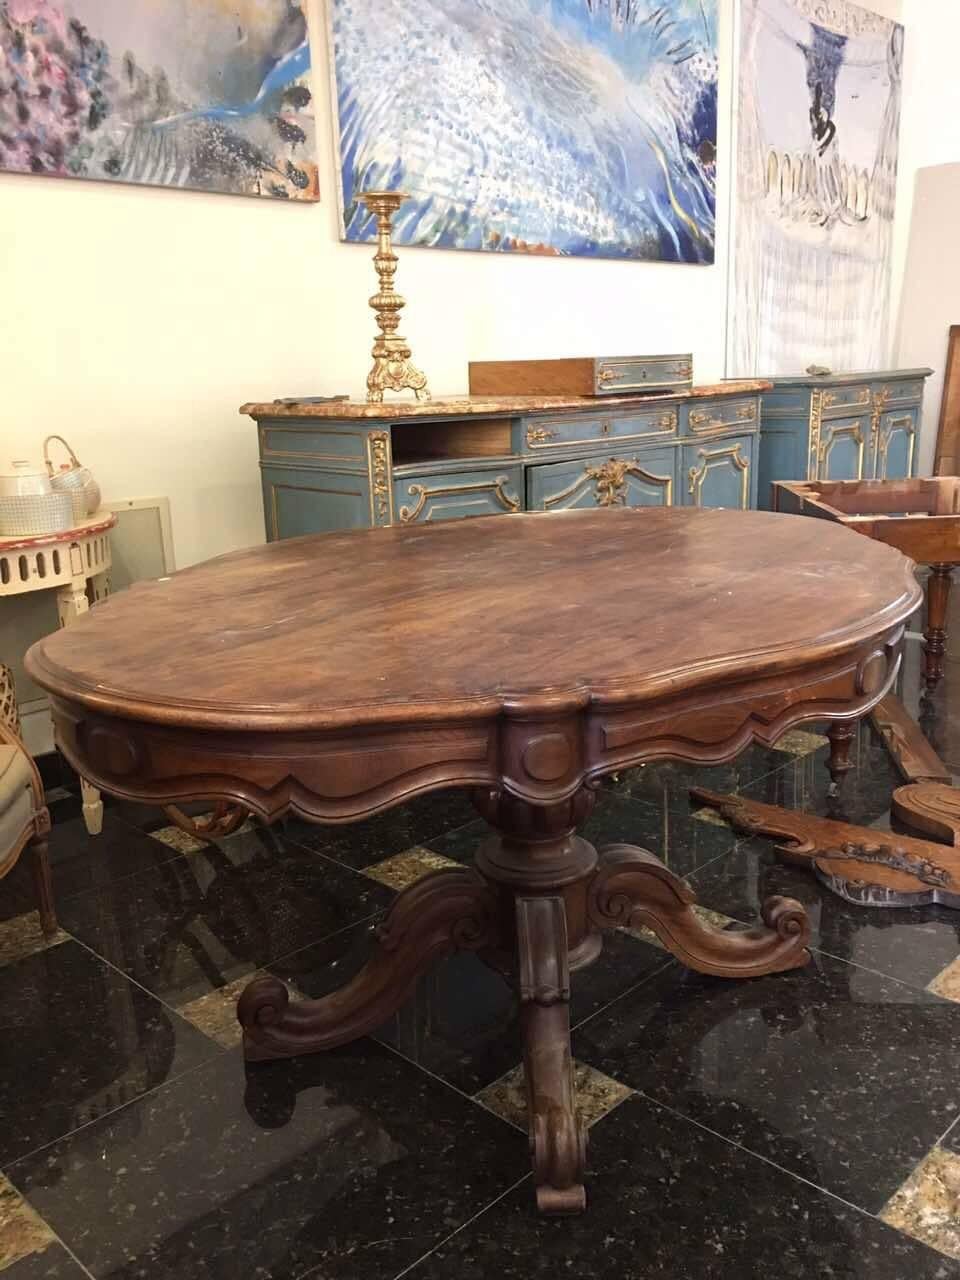 19th century Victorian style walnut centre table with beautifully figured shaped, tilt-top and moulded edge, standing on carved turned column and four carved legs. The table is in very good condition,
France, circa 1890.